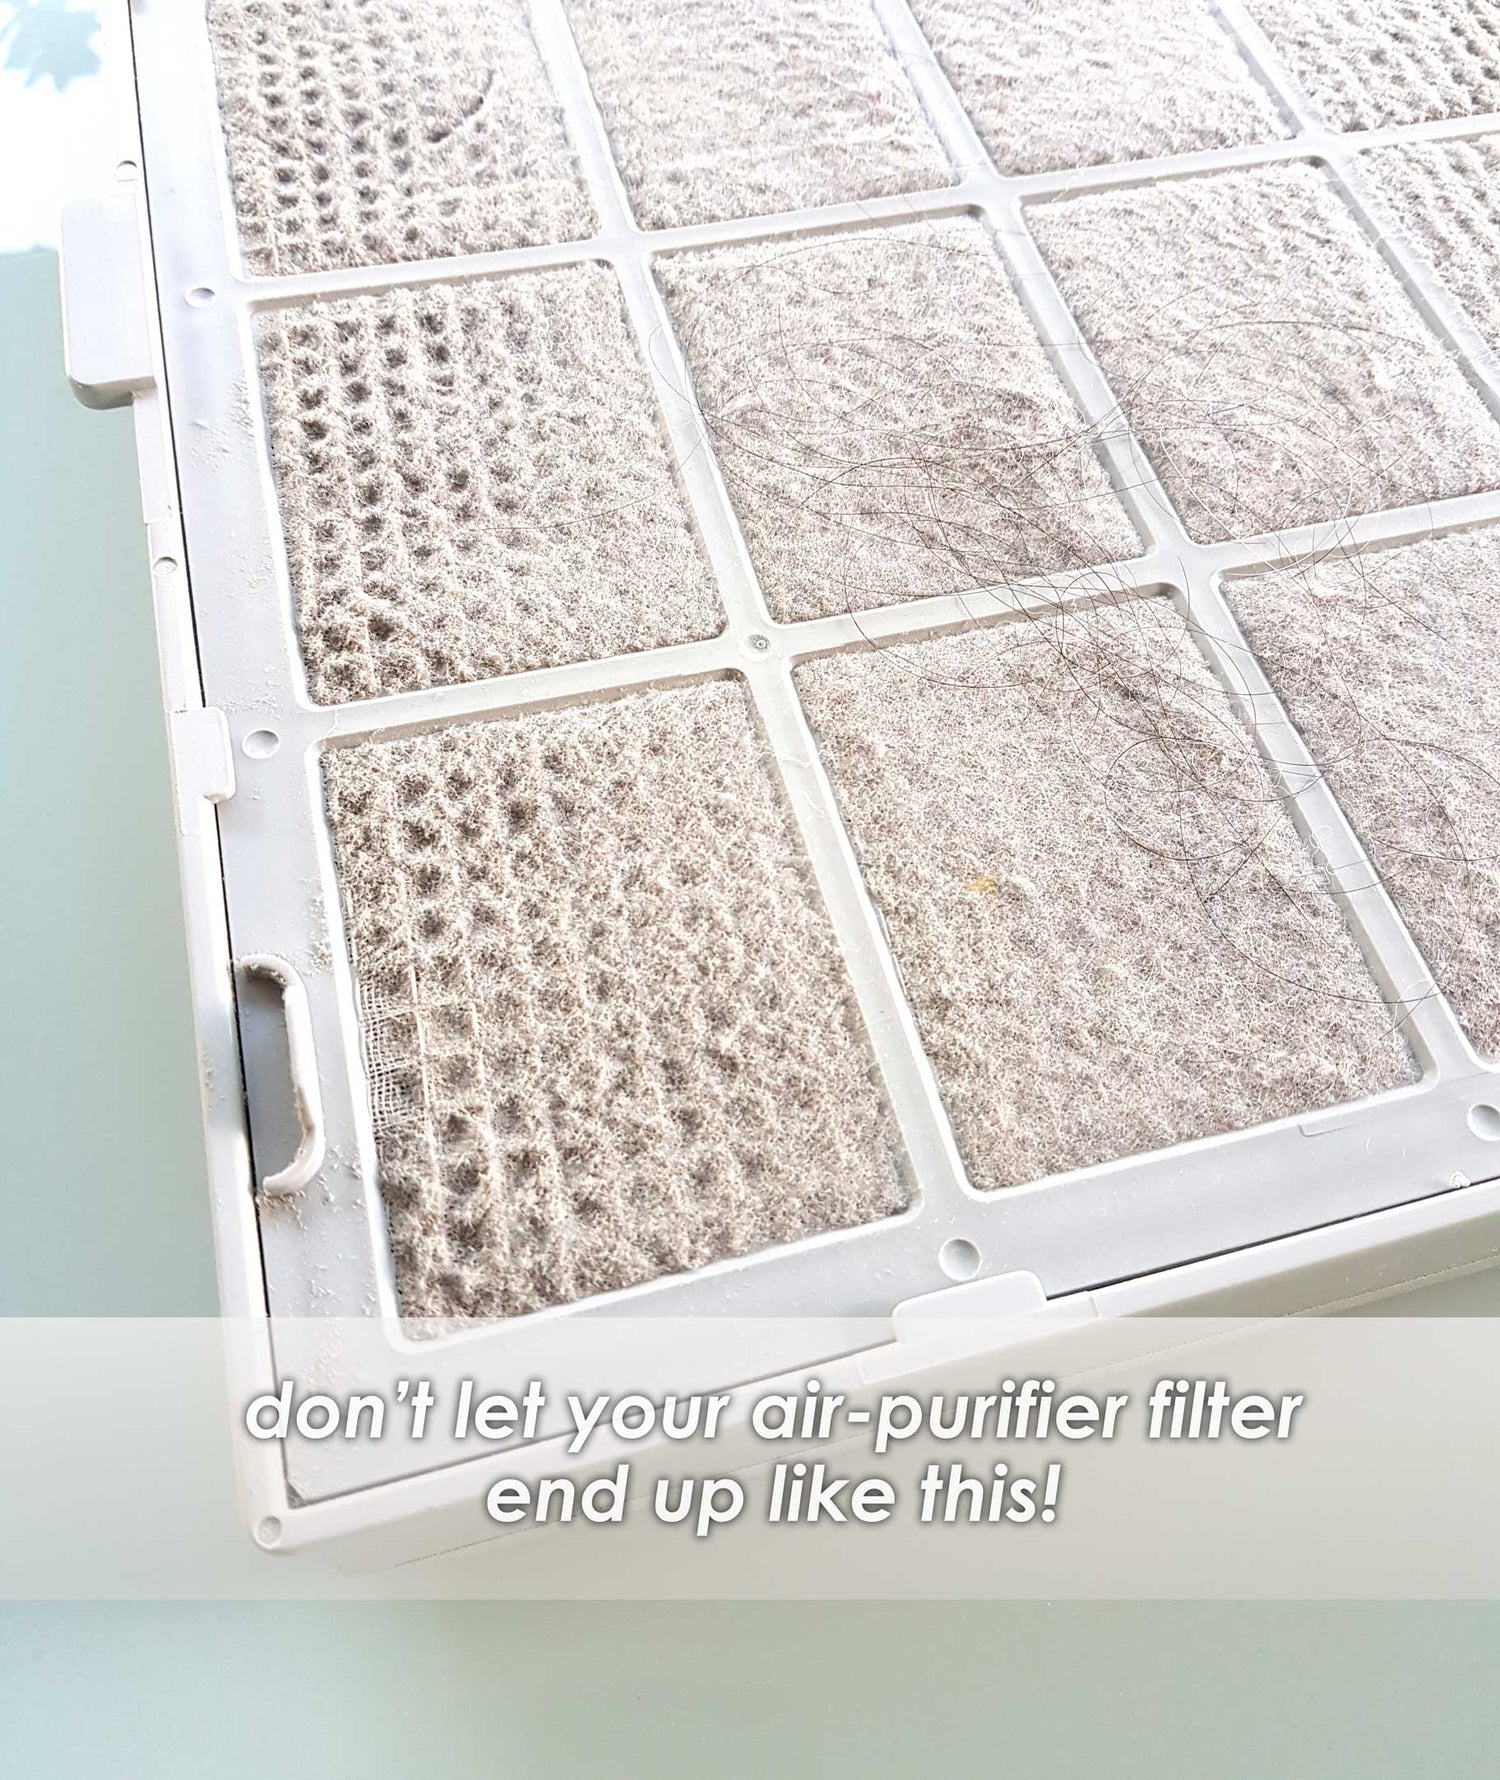 a dirty air purifier with hair in the filter